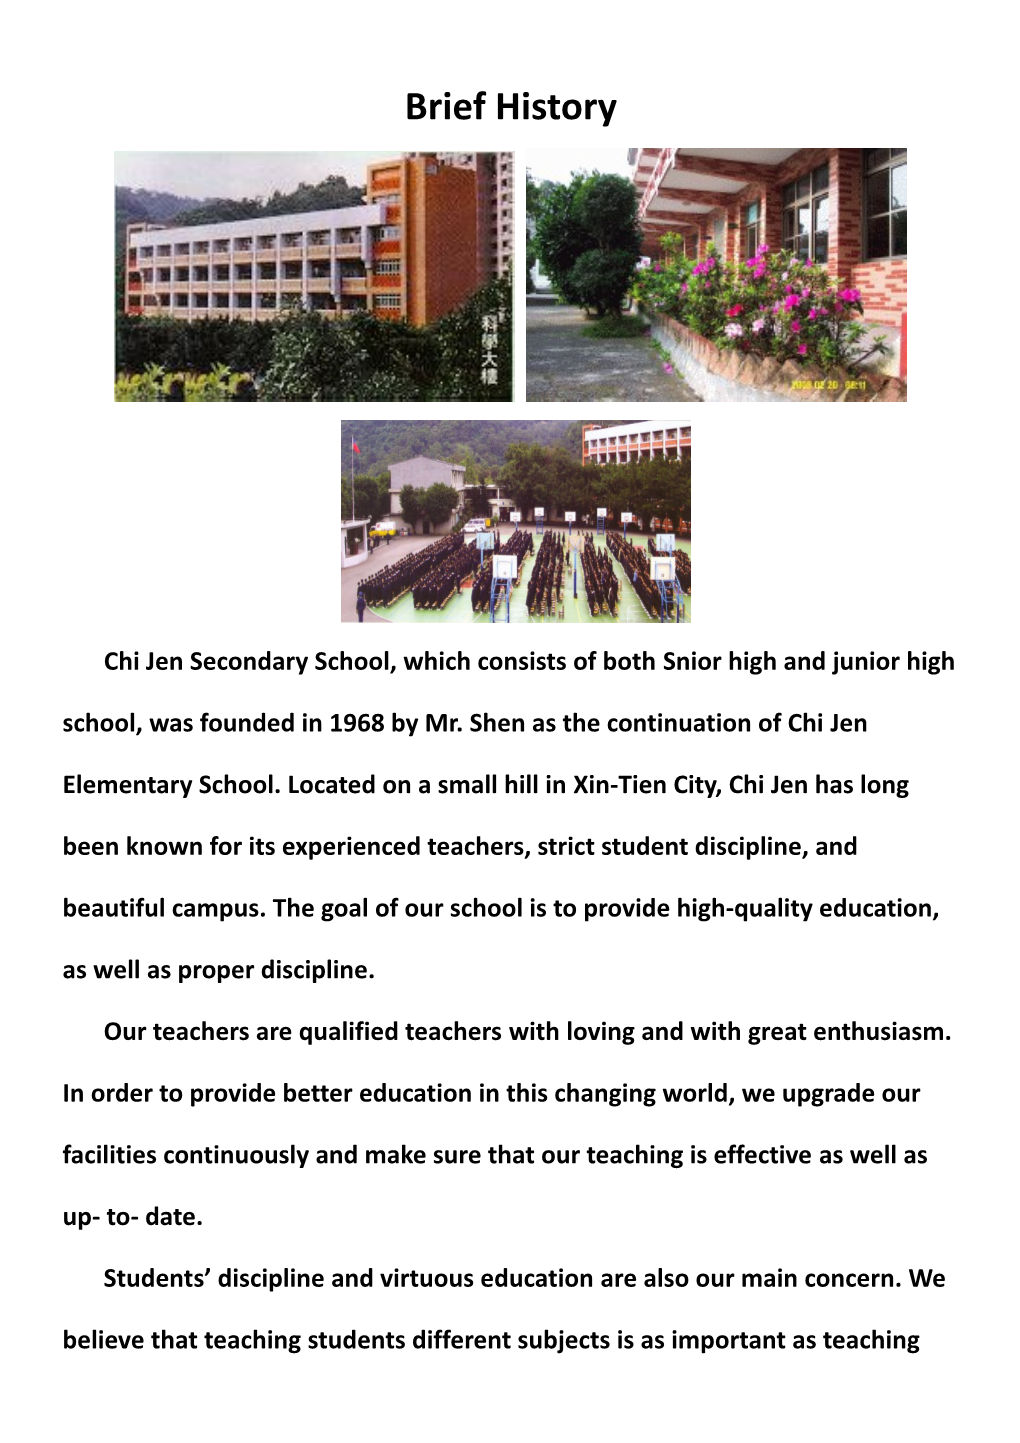 Chi Jen Secondary School, Which Consists of Both Snior High and Junior High School, Was